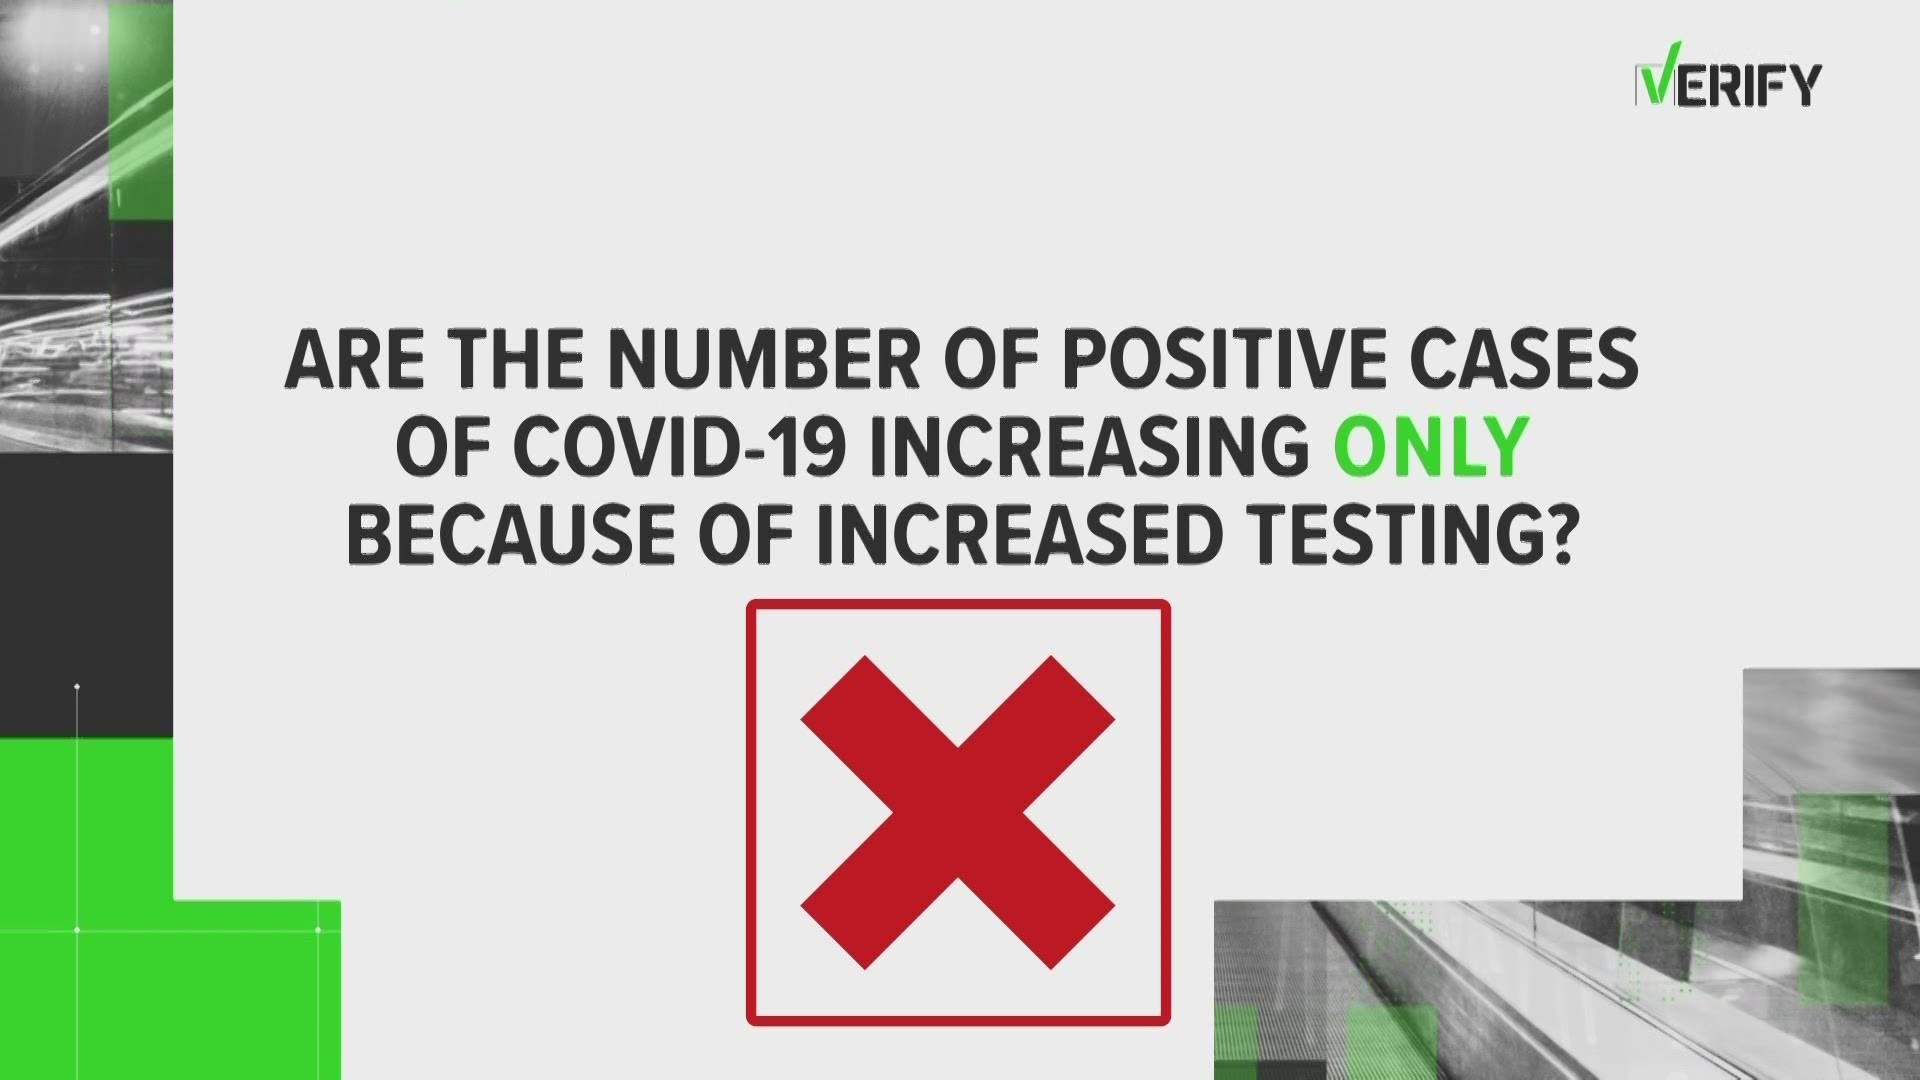 The claim that COVID-19 cases are going up only because testing is going up is misleading. Here's why.